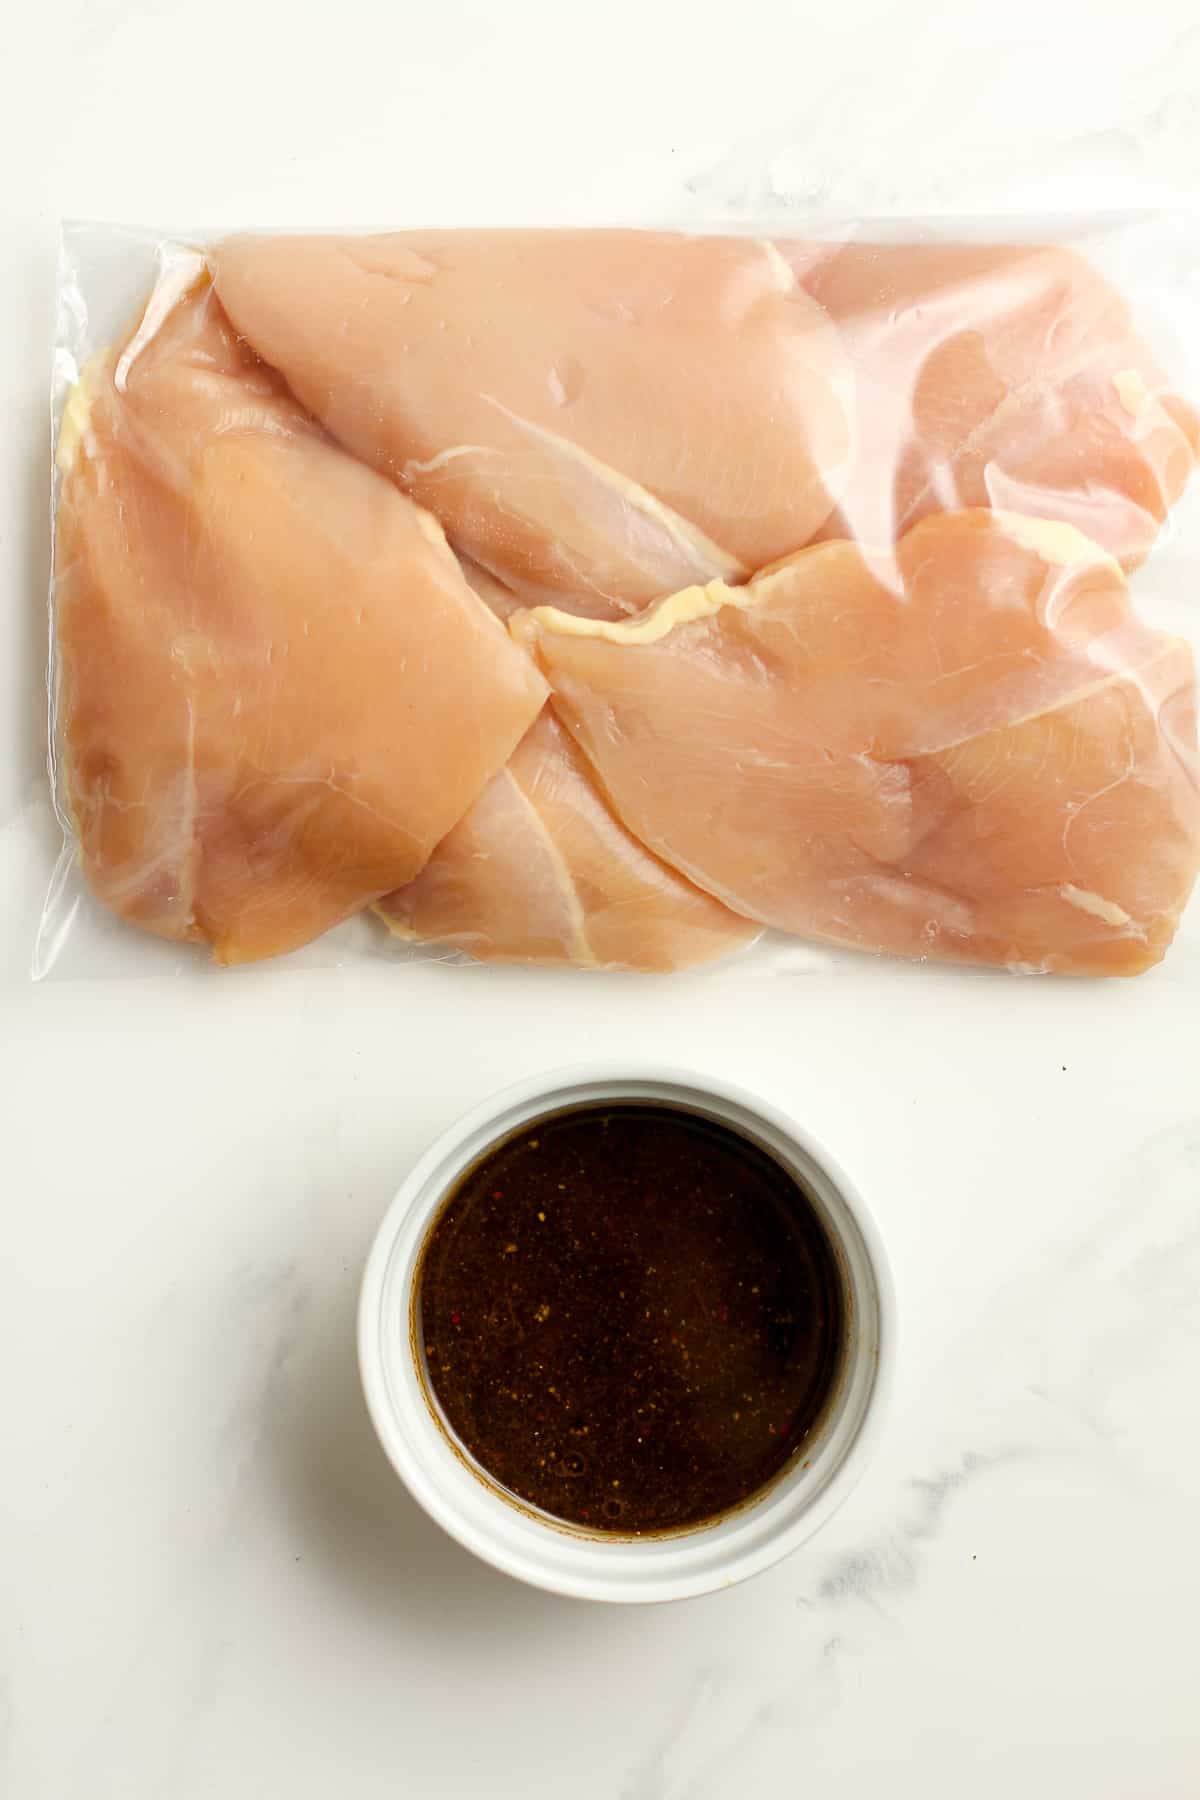 A bag of chicken breasts next to a small bowl of marinade.